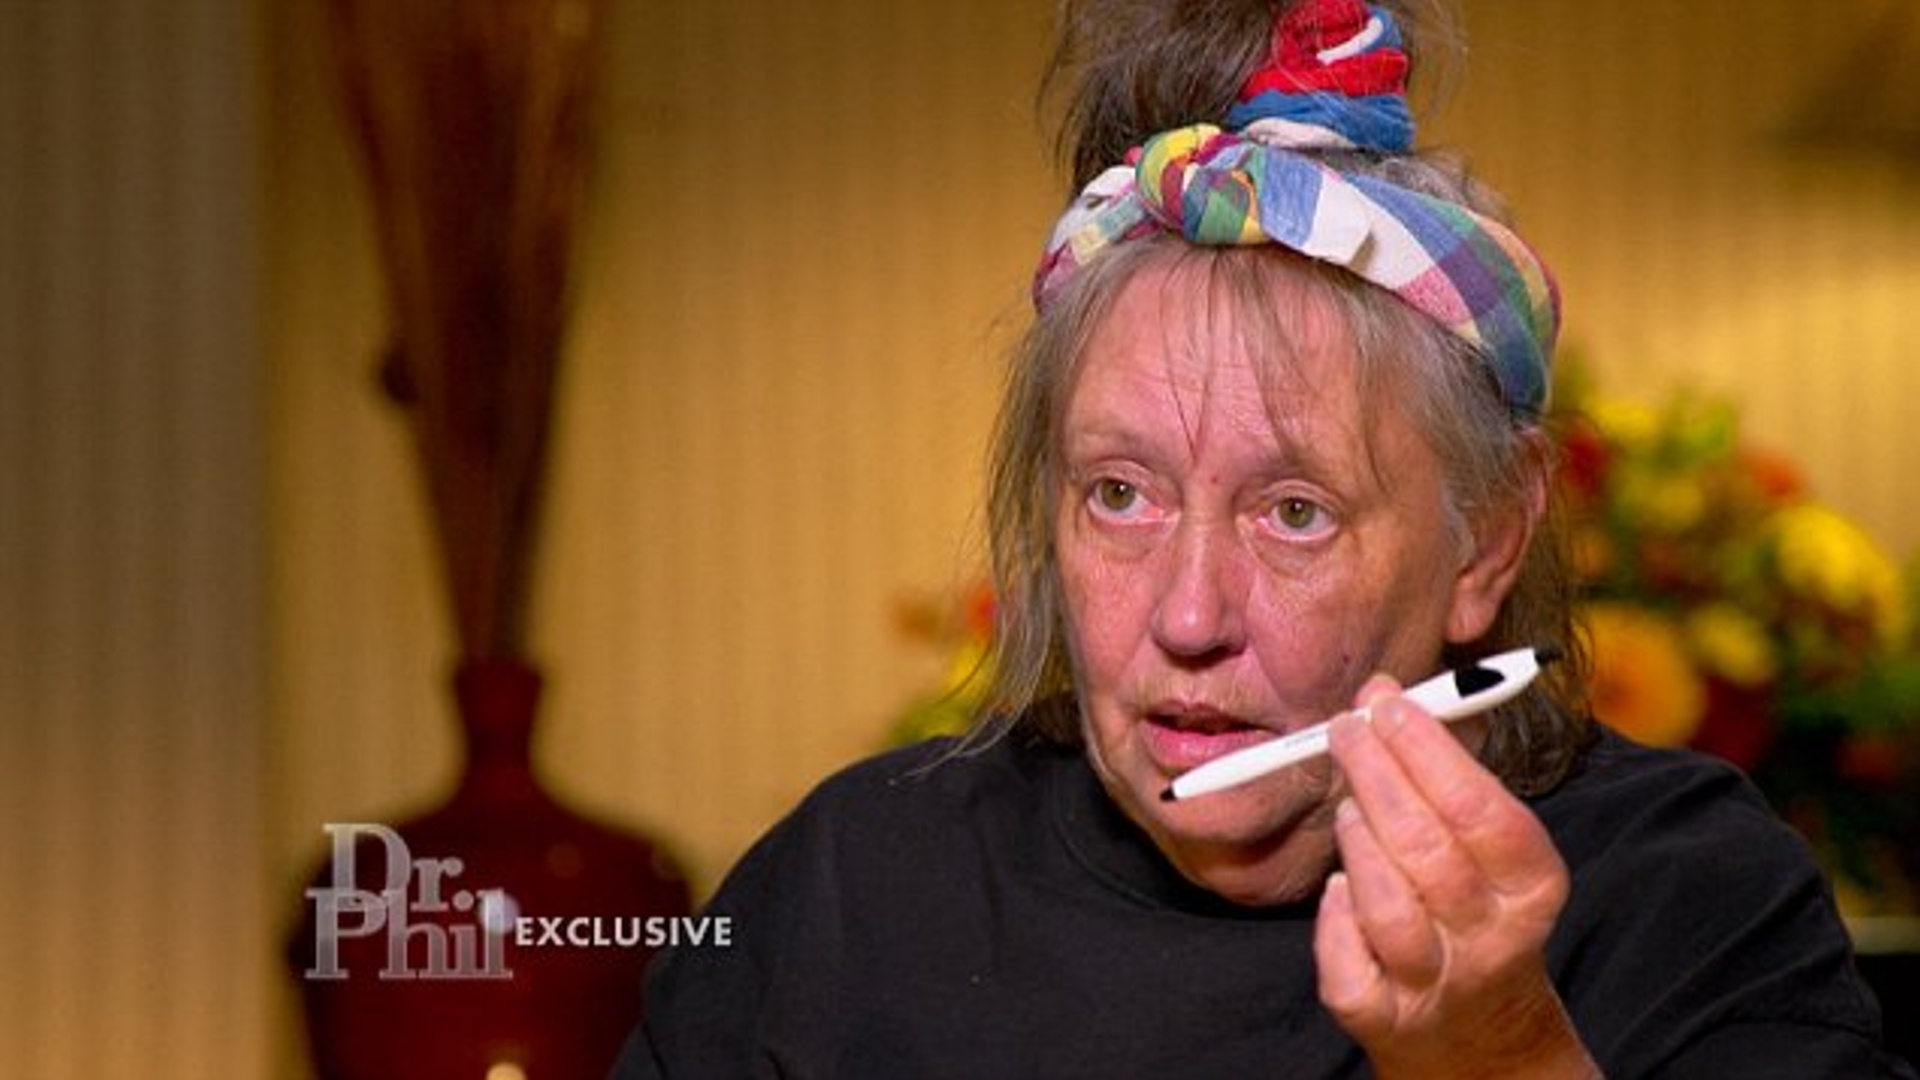 Dr. Phil Shelley Duvall interview controversy